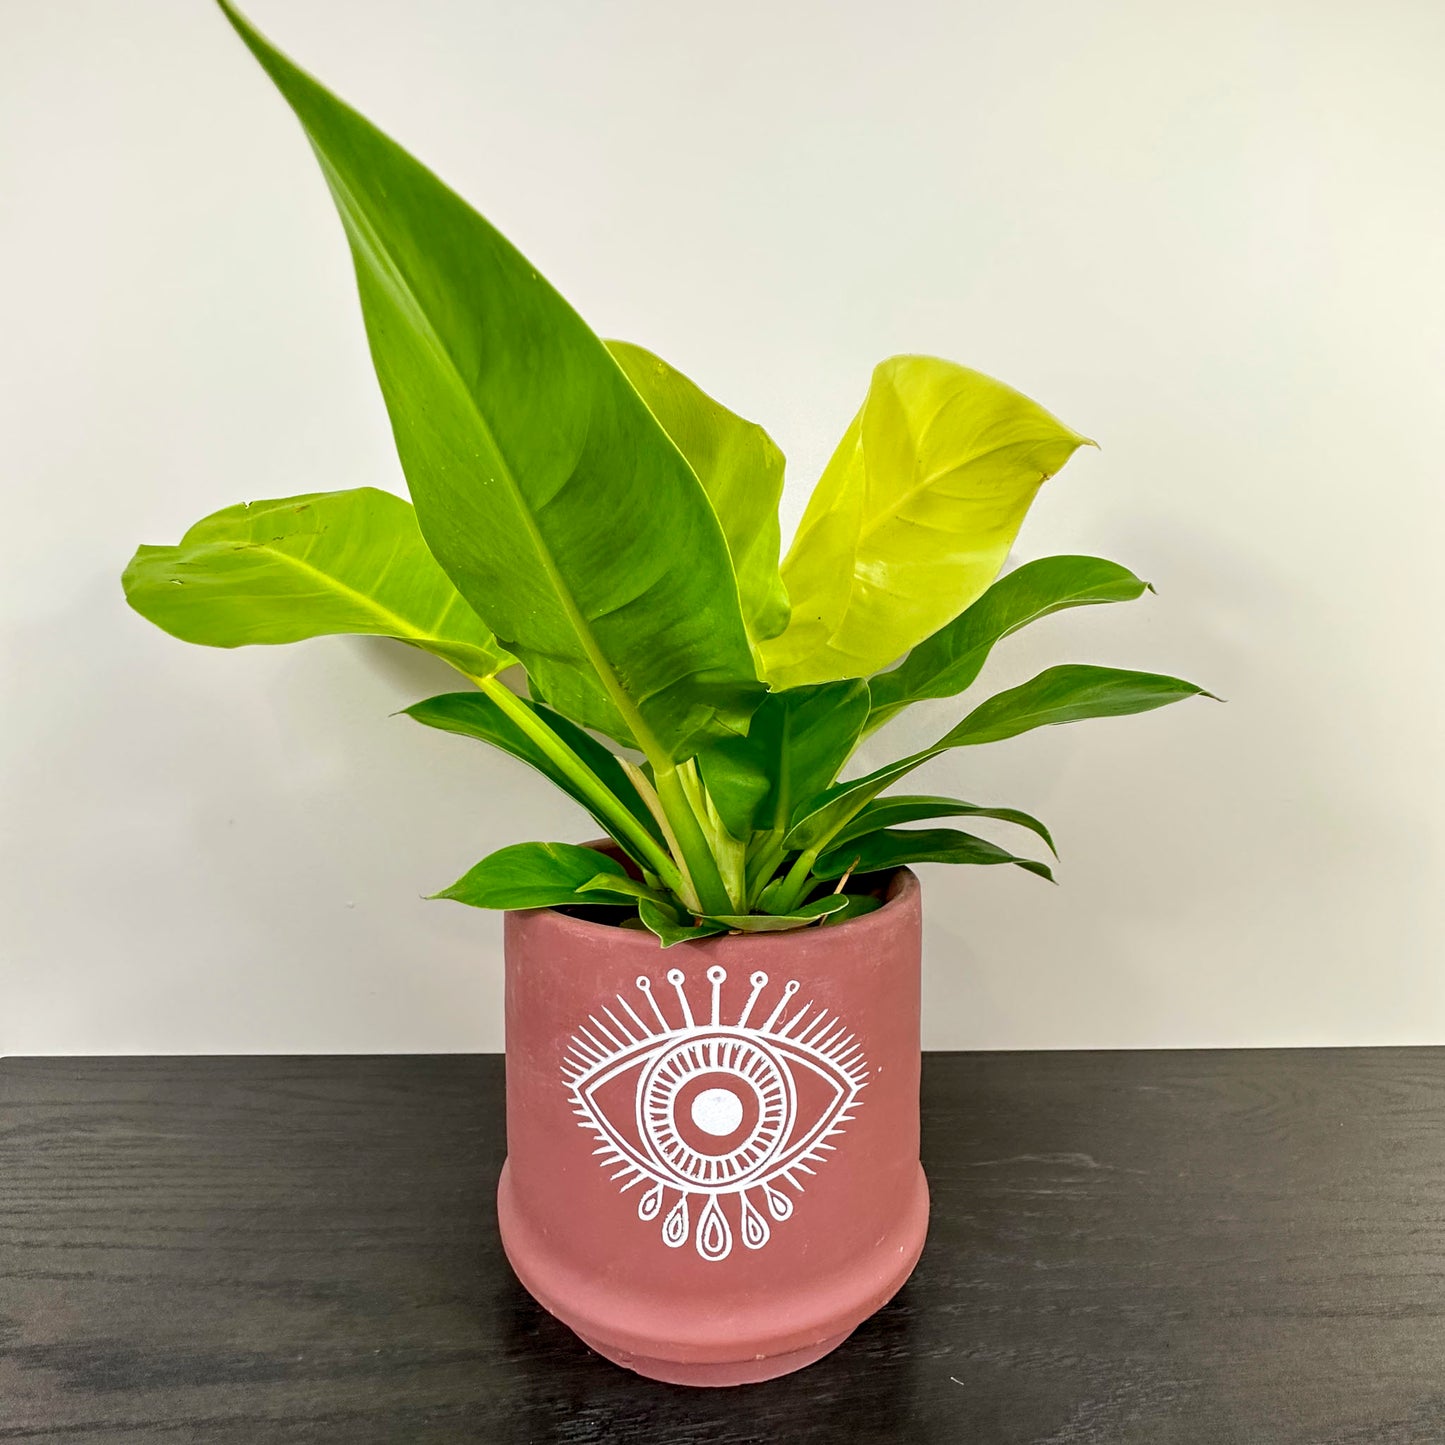 Third eye planter holding a philodendron